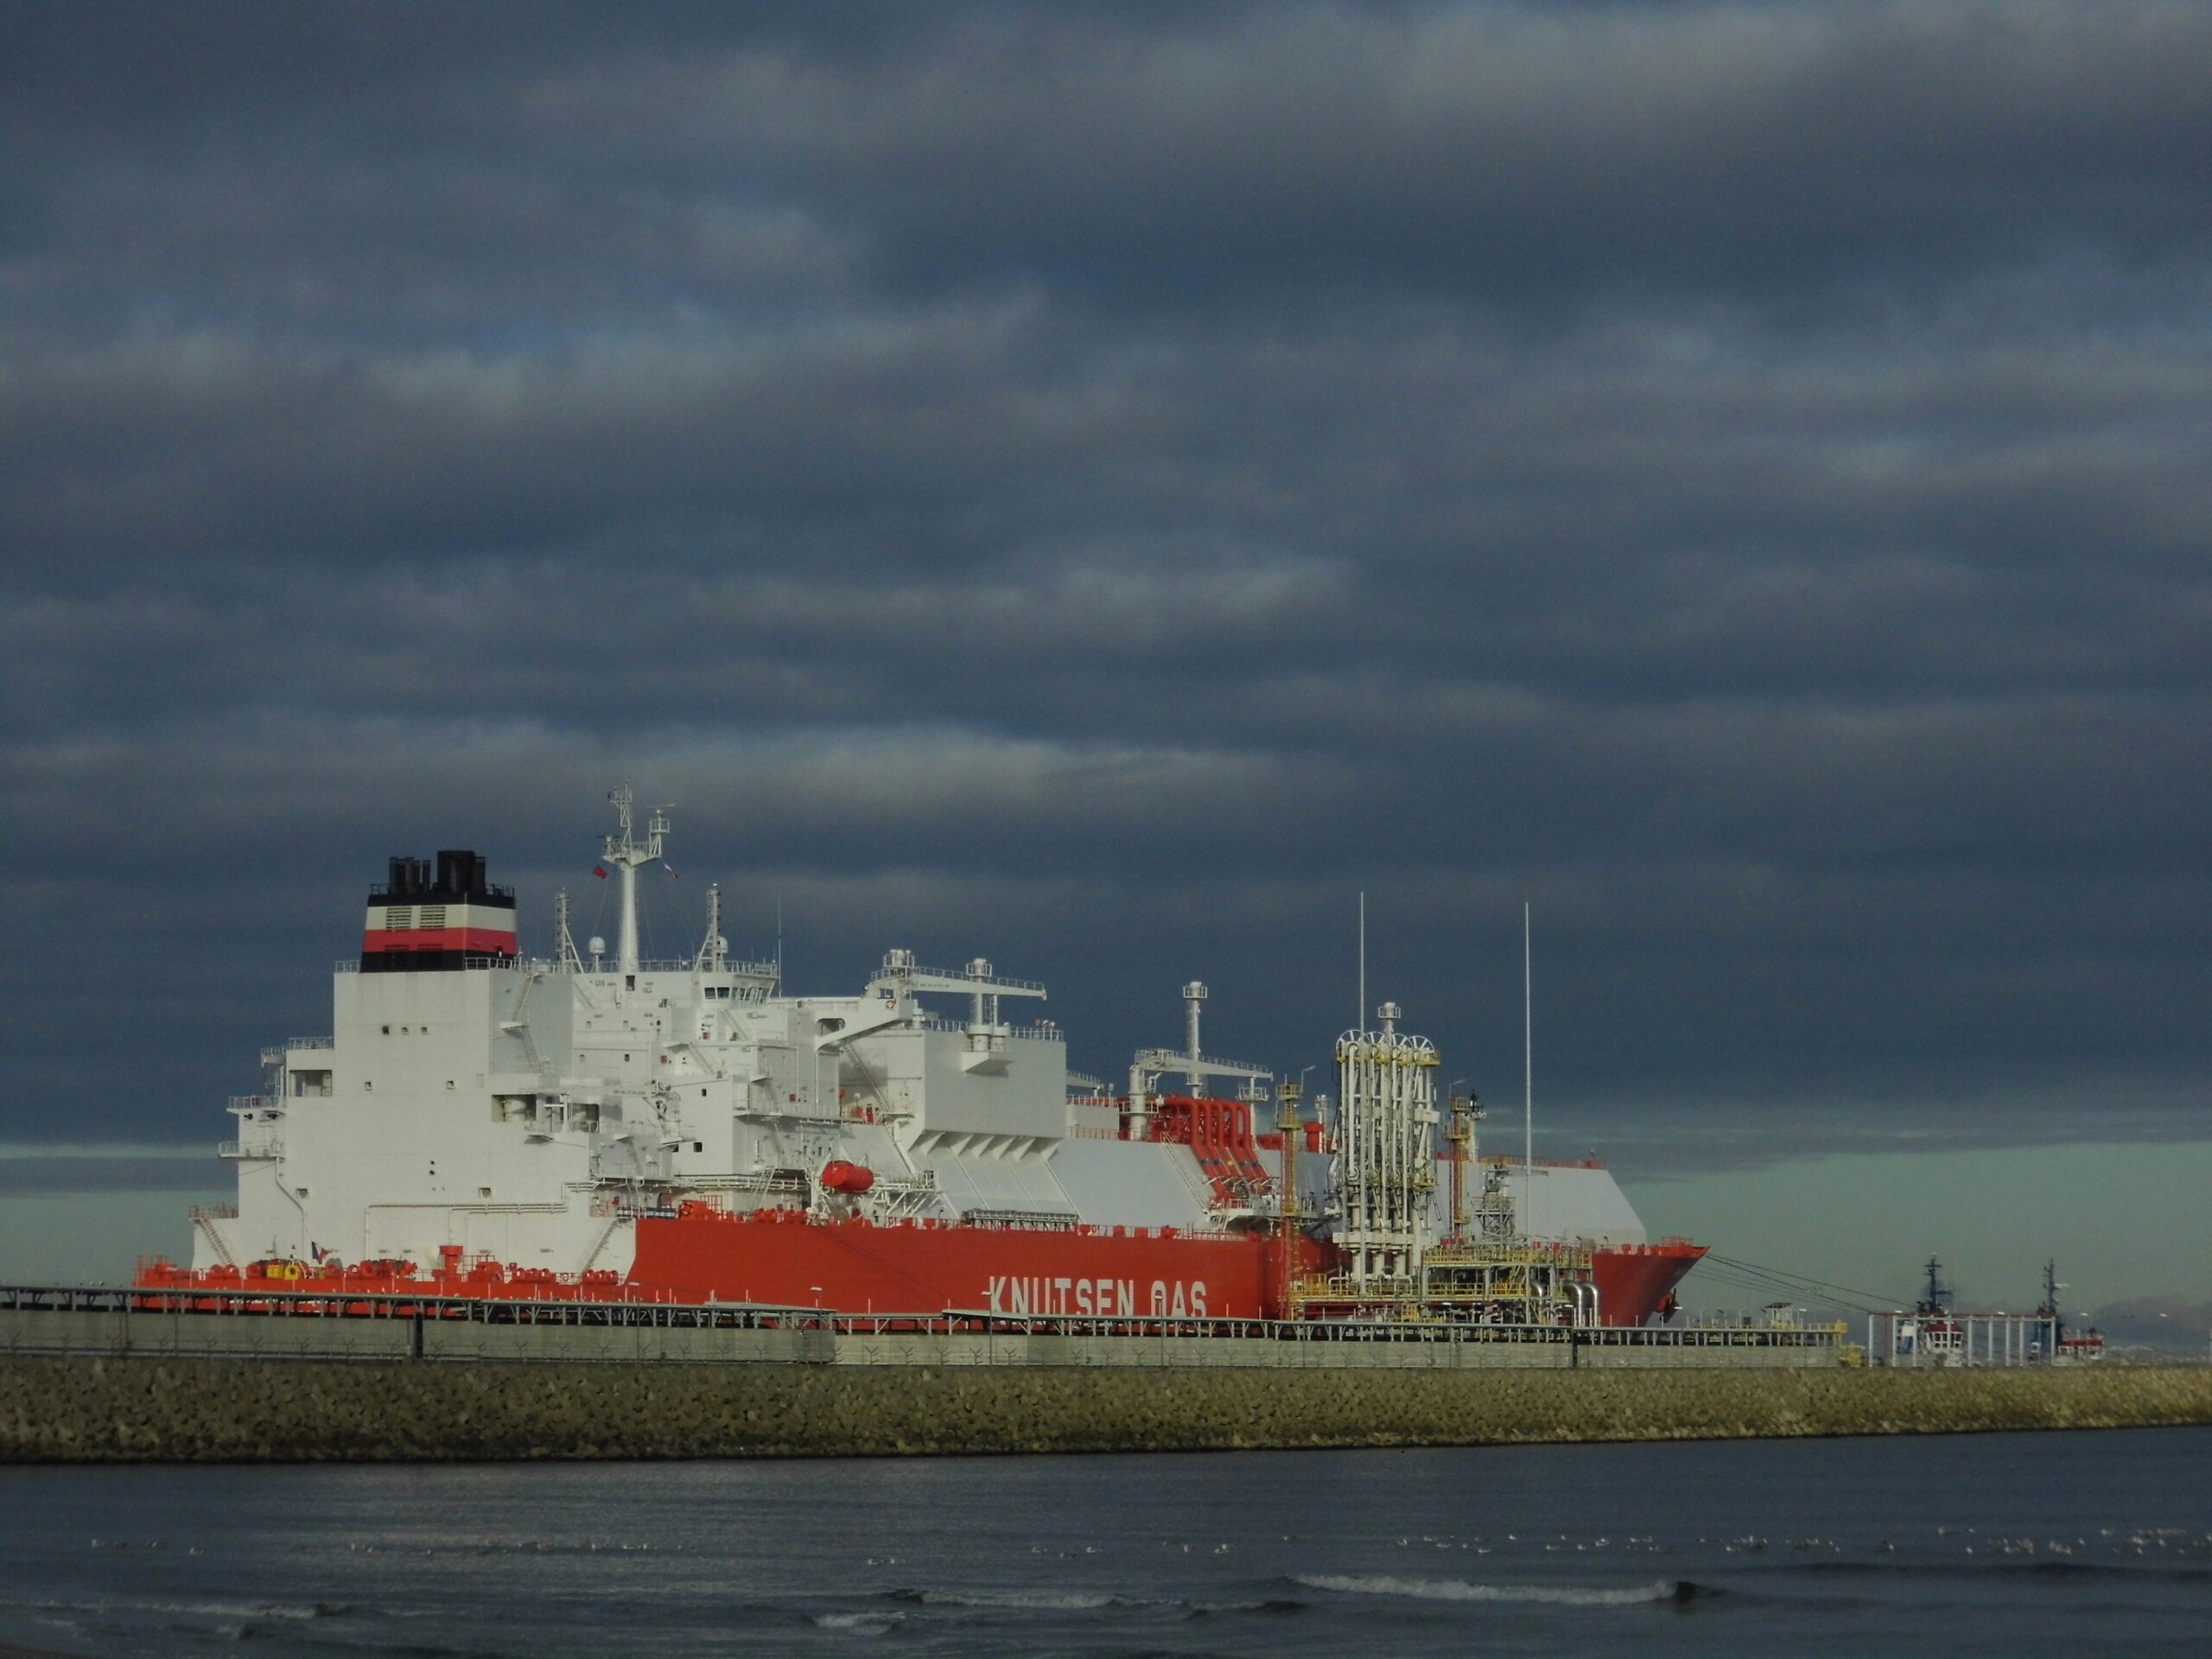 large red and white lng ship